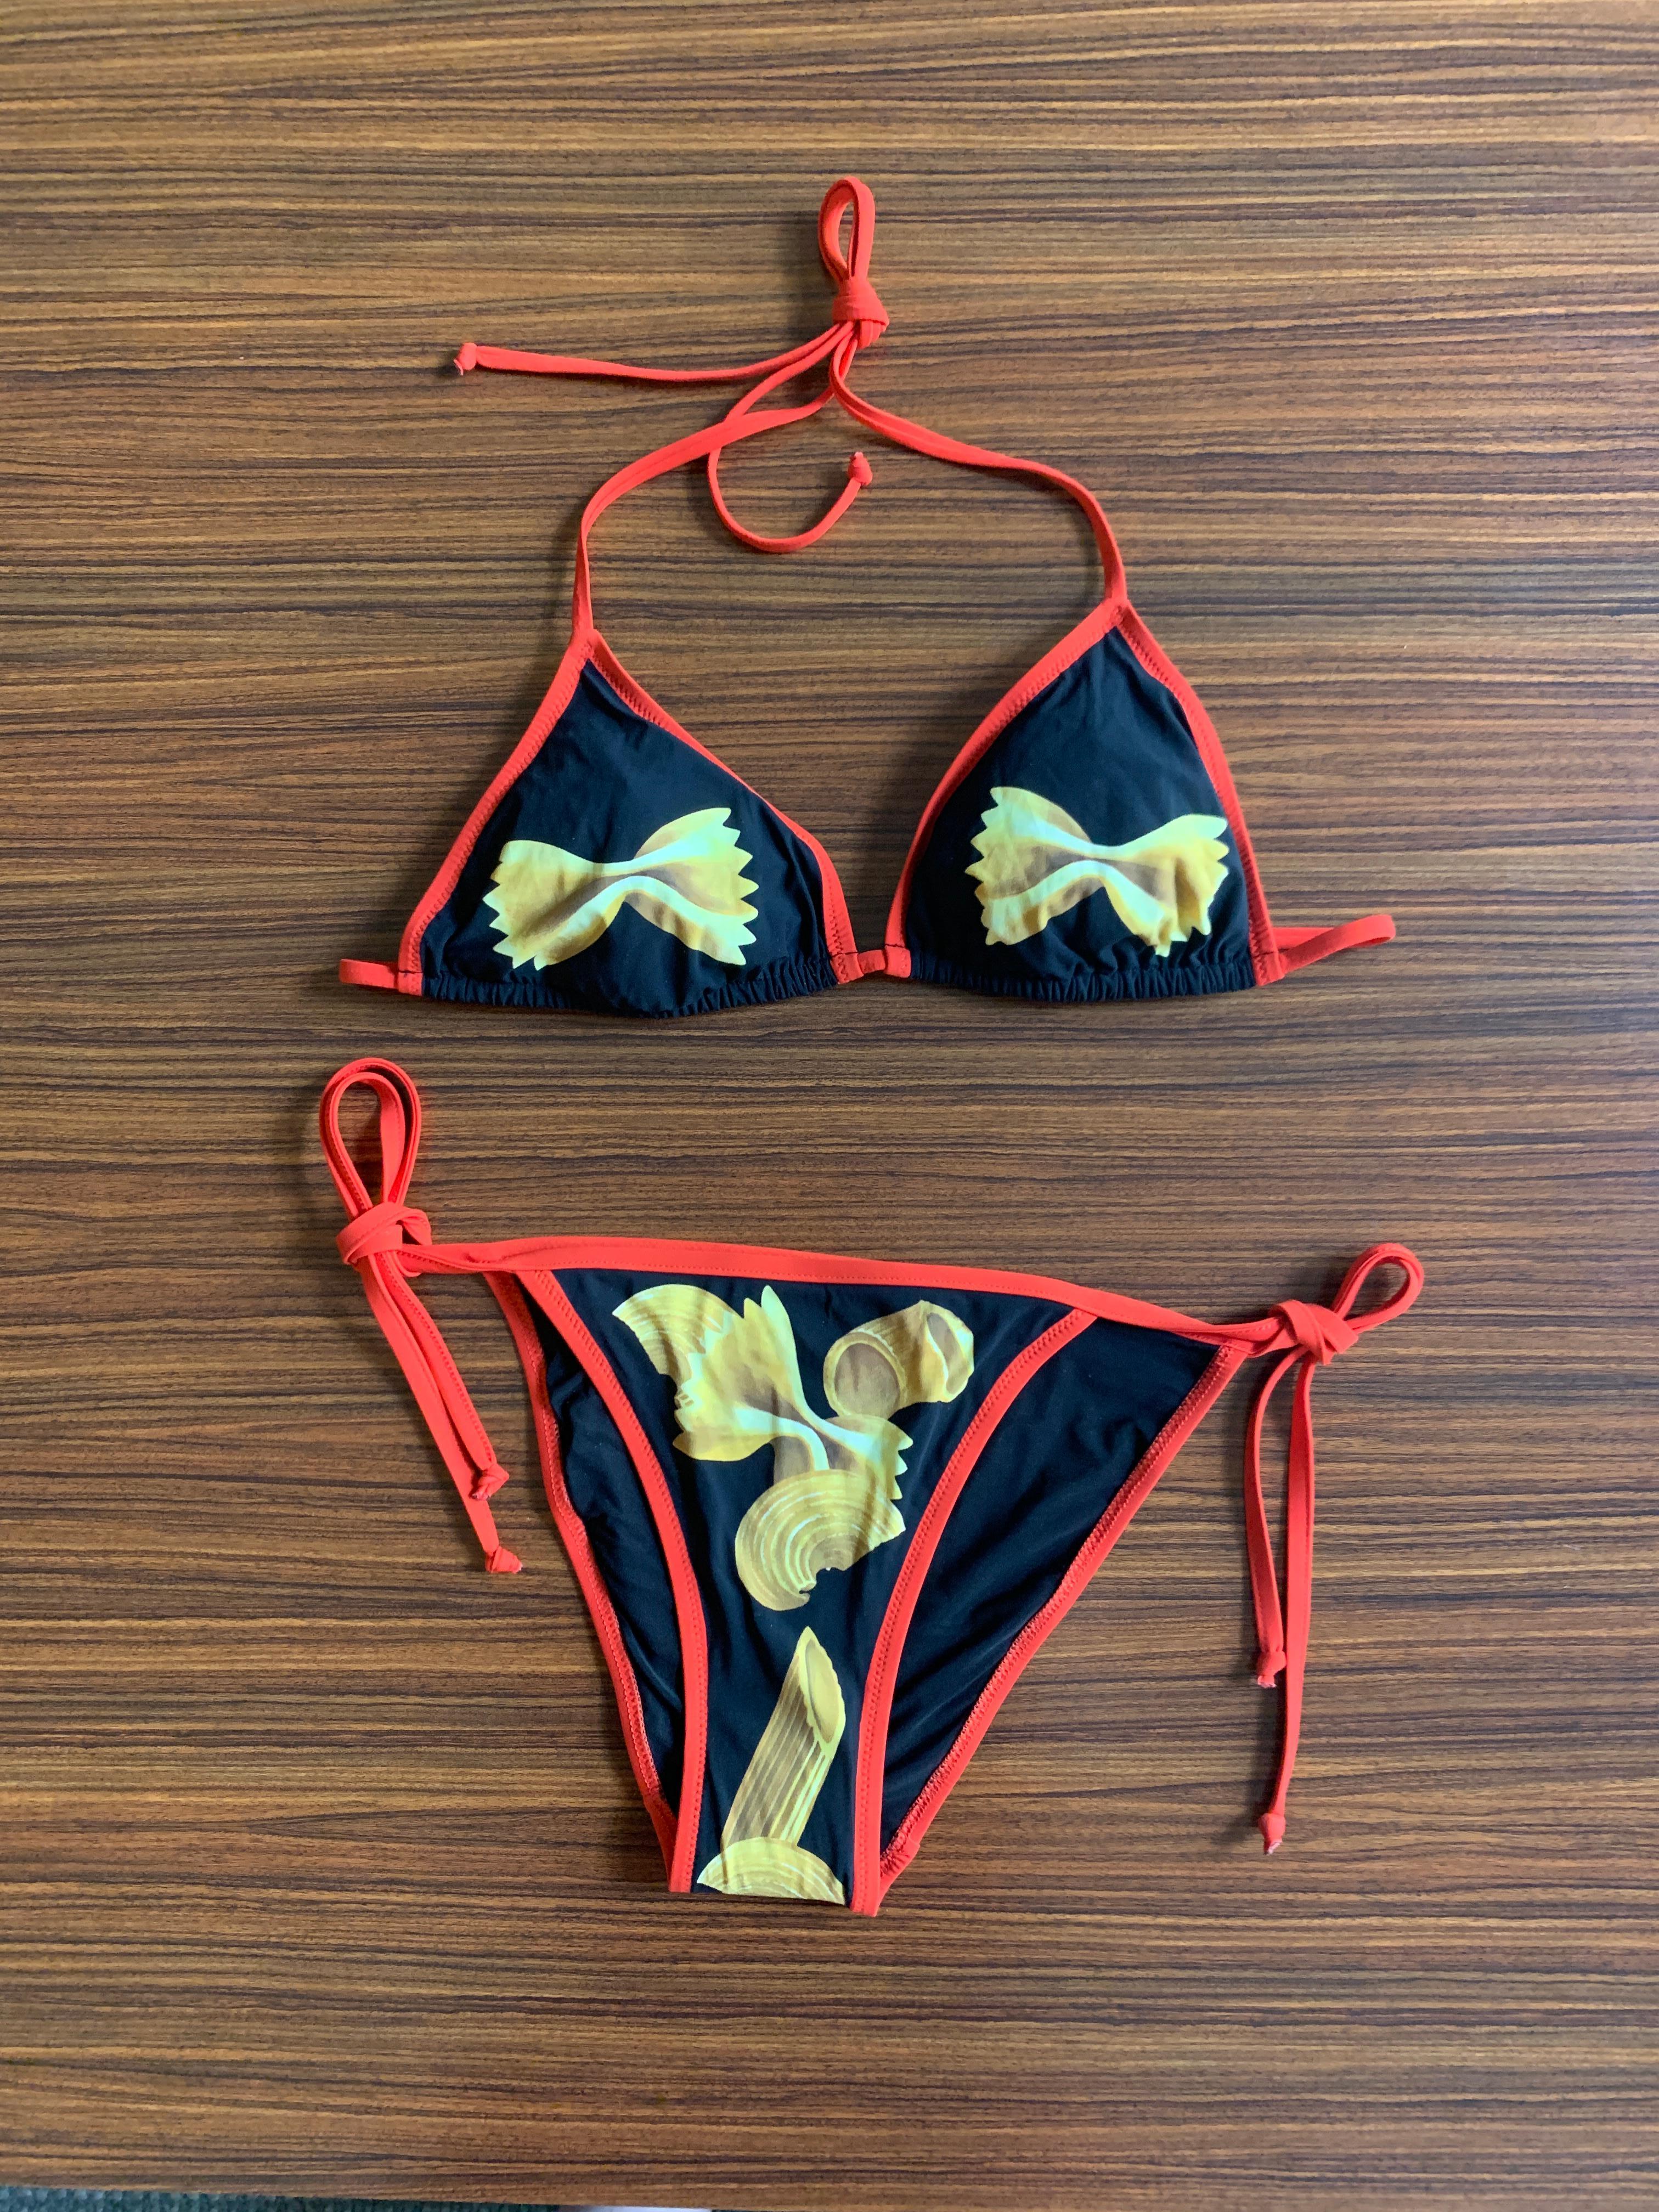 Dolce & Gabbana black bikini featuring a variety of pasta. Yellow farfalle, macaroni noodles, and penne adorn this string bikini with red trim. 
A truly iconic print from Dolce & Gabbana's Spring/Summer 2017 collection.

75% polyamide, 25% elastane